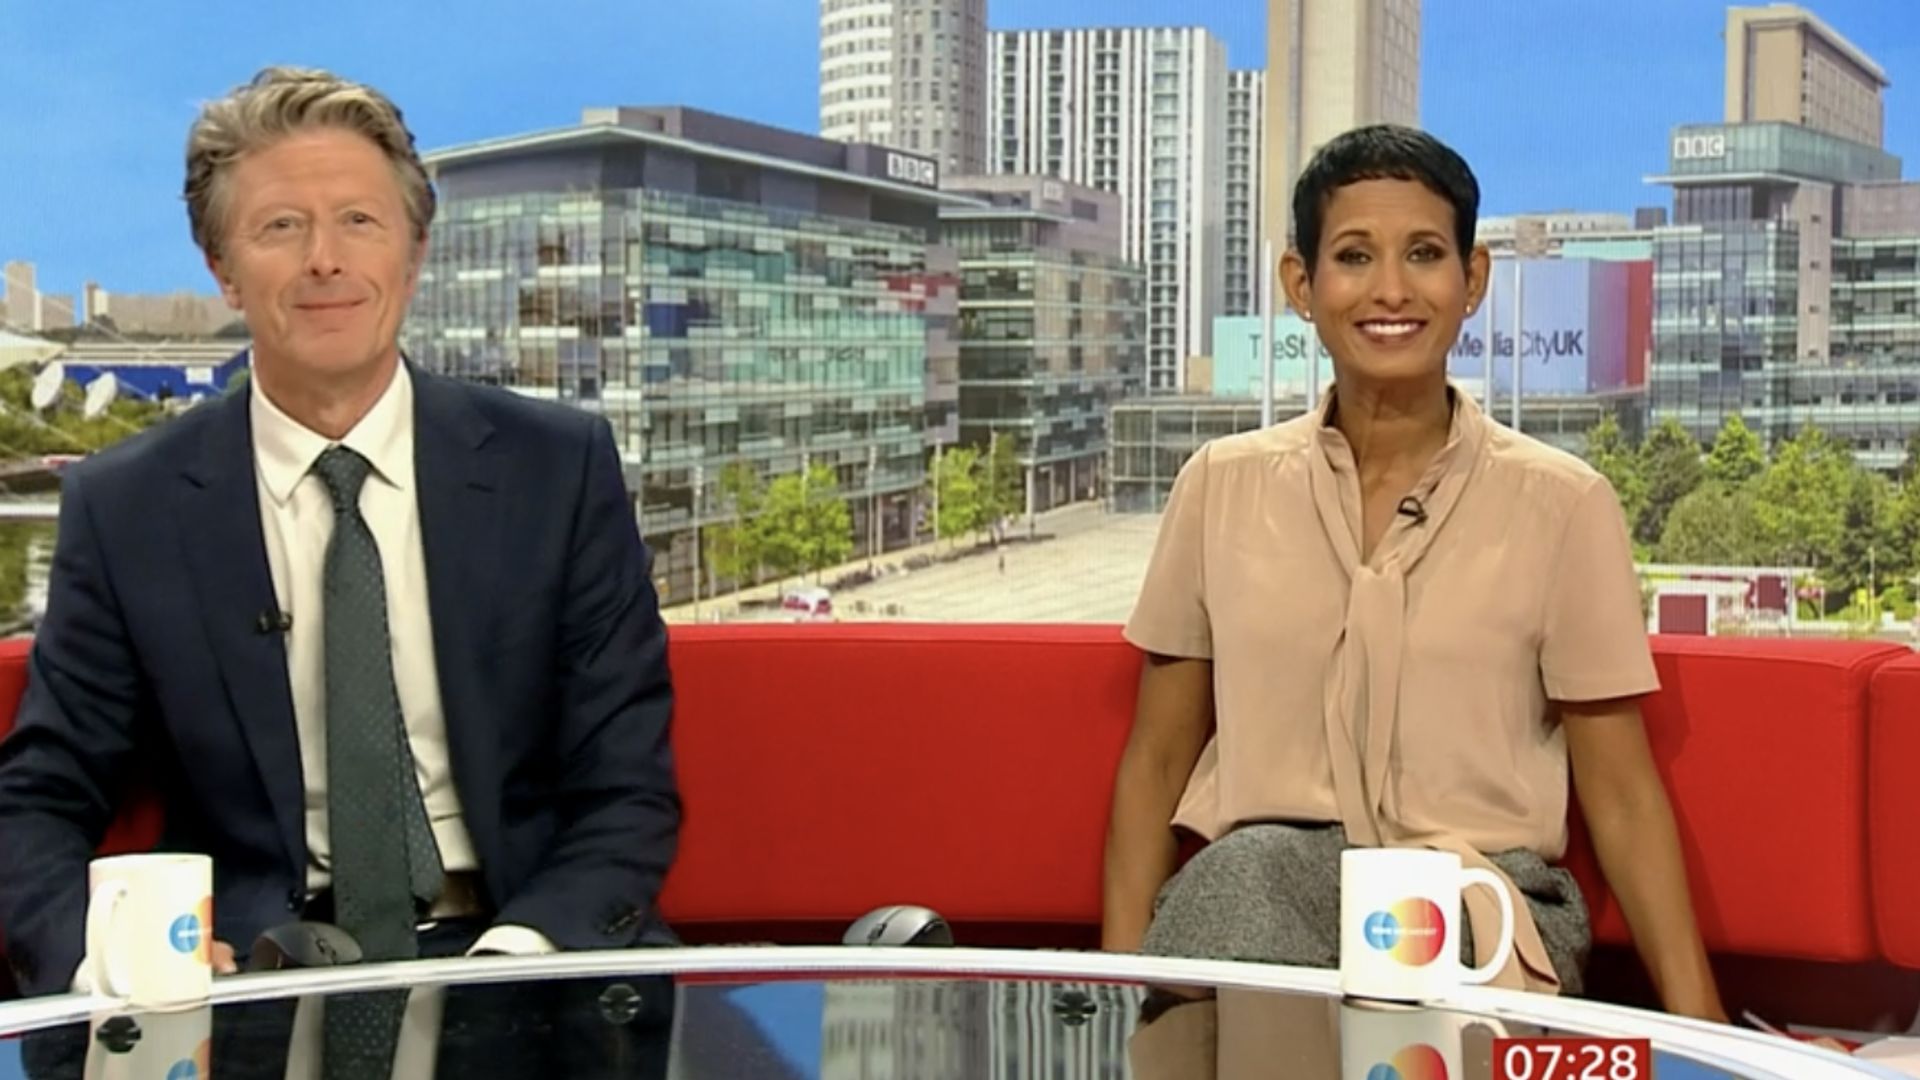 Naga Munchetty and Charlie Stayt smiling on the red couch with breakfast bbc